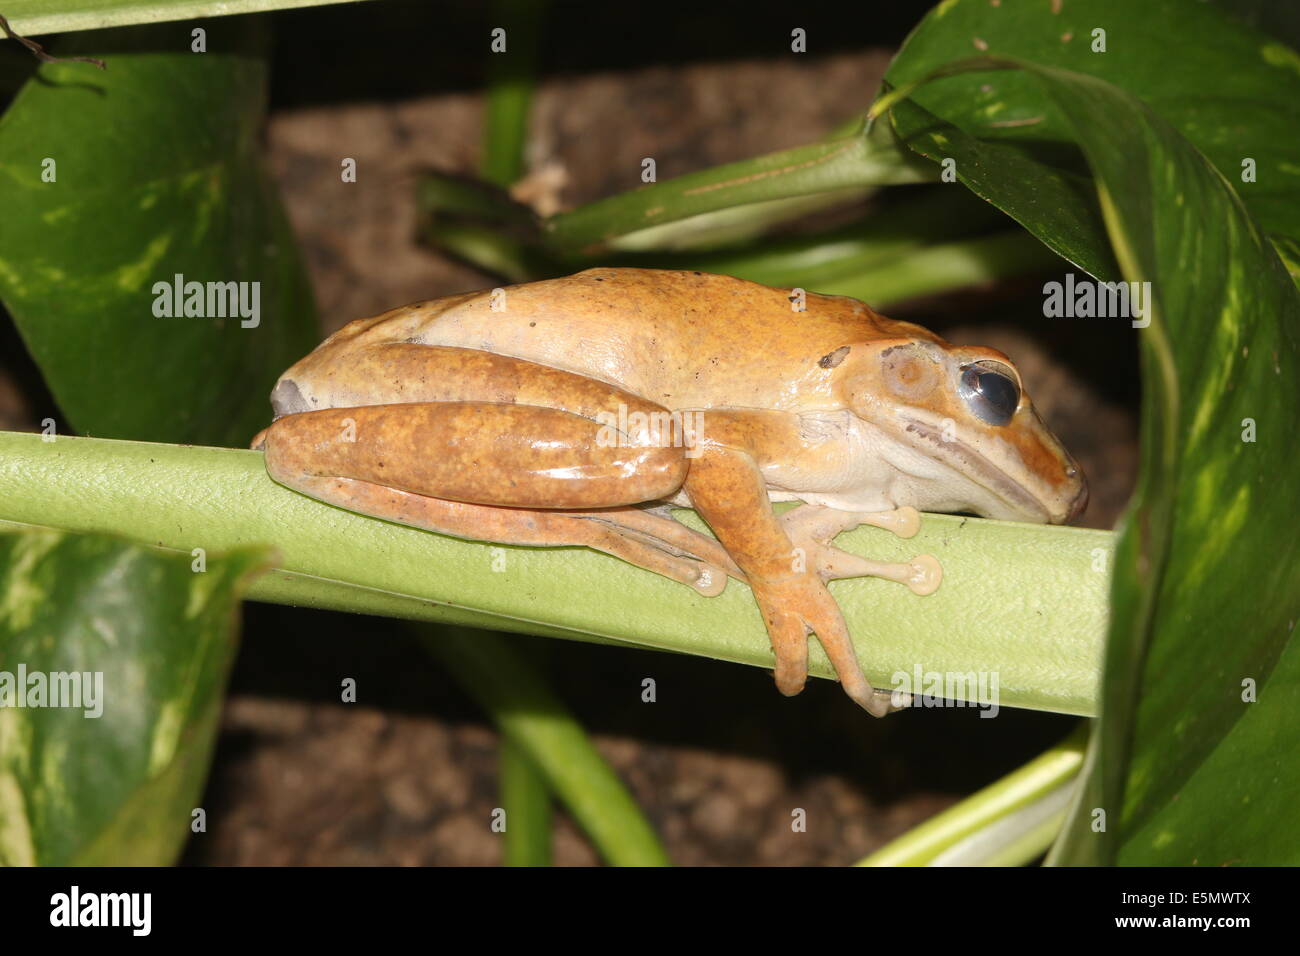 Common Tree Frog or Four-lined tree frog (Polypedates leucomystax) close-up Stock Photo